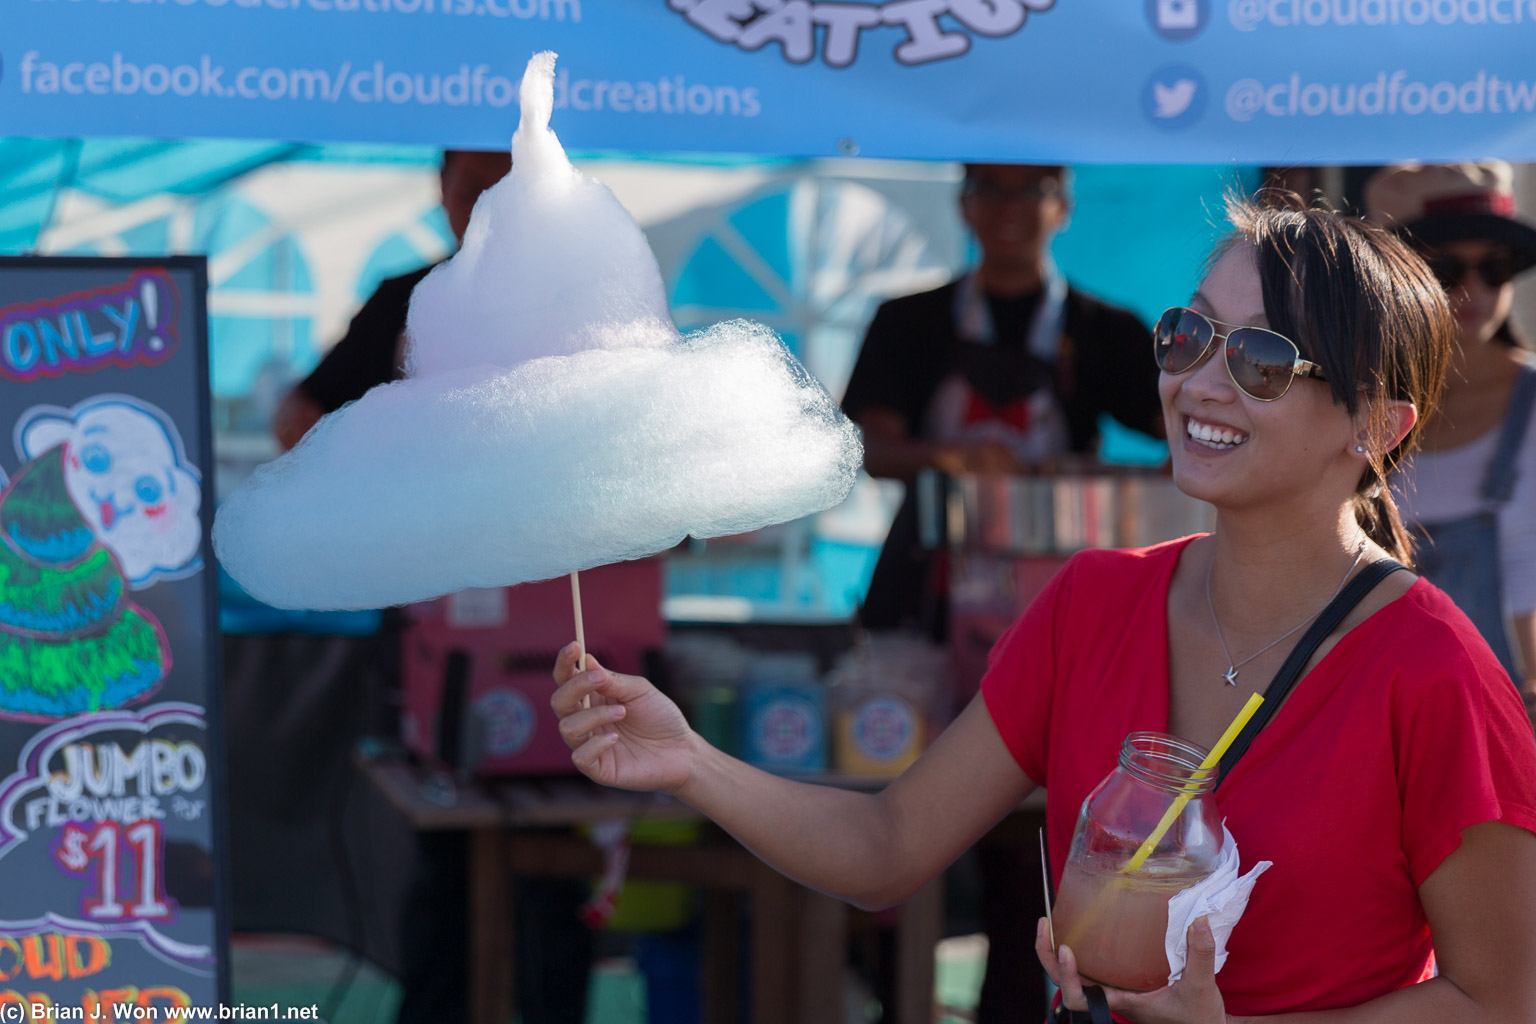 Cloud Food's crazy shaped cotton candy.